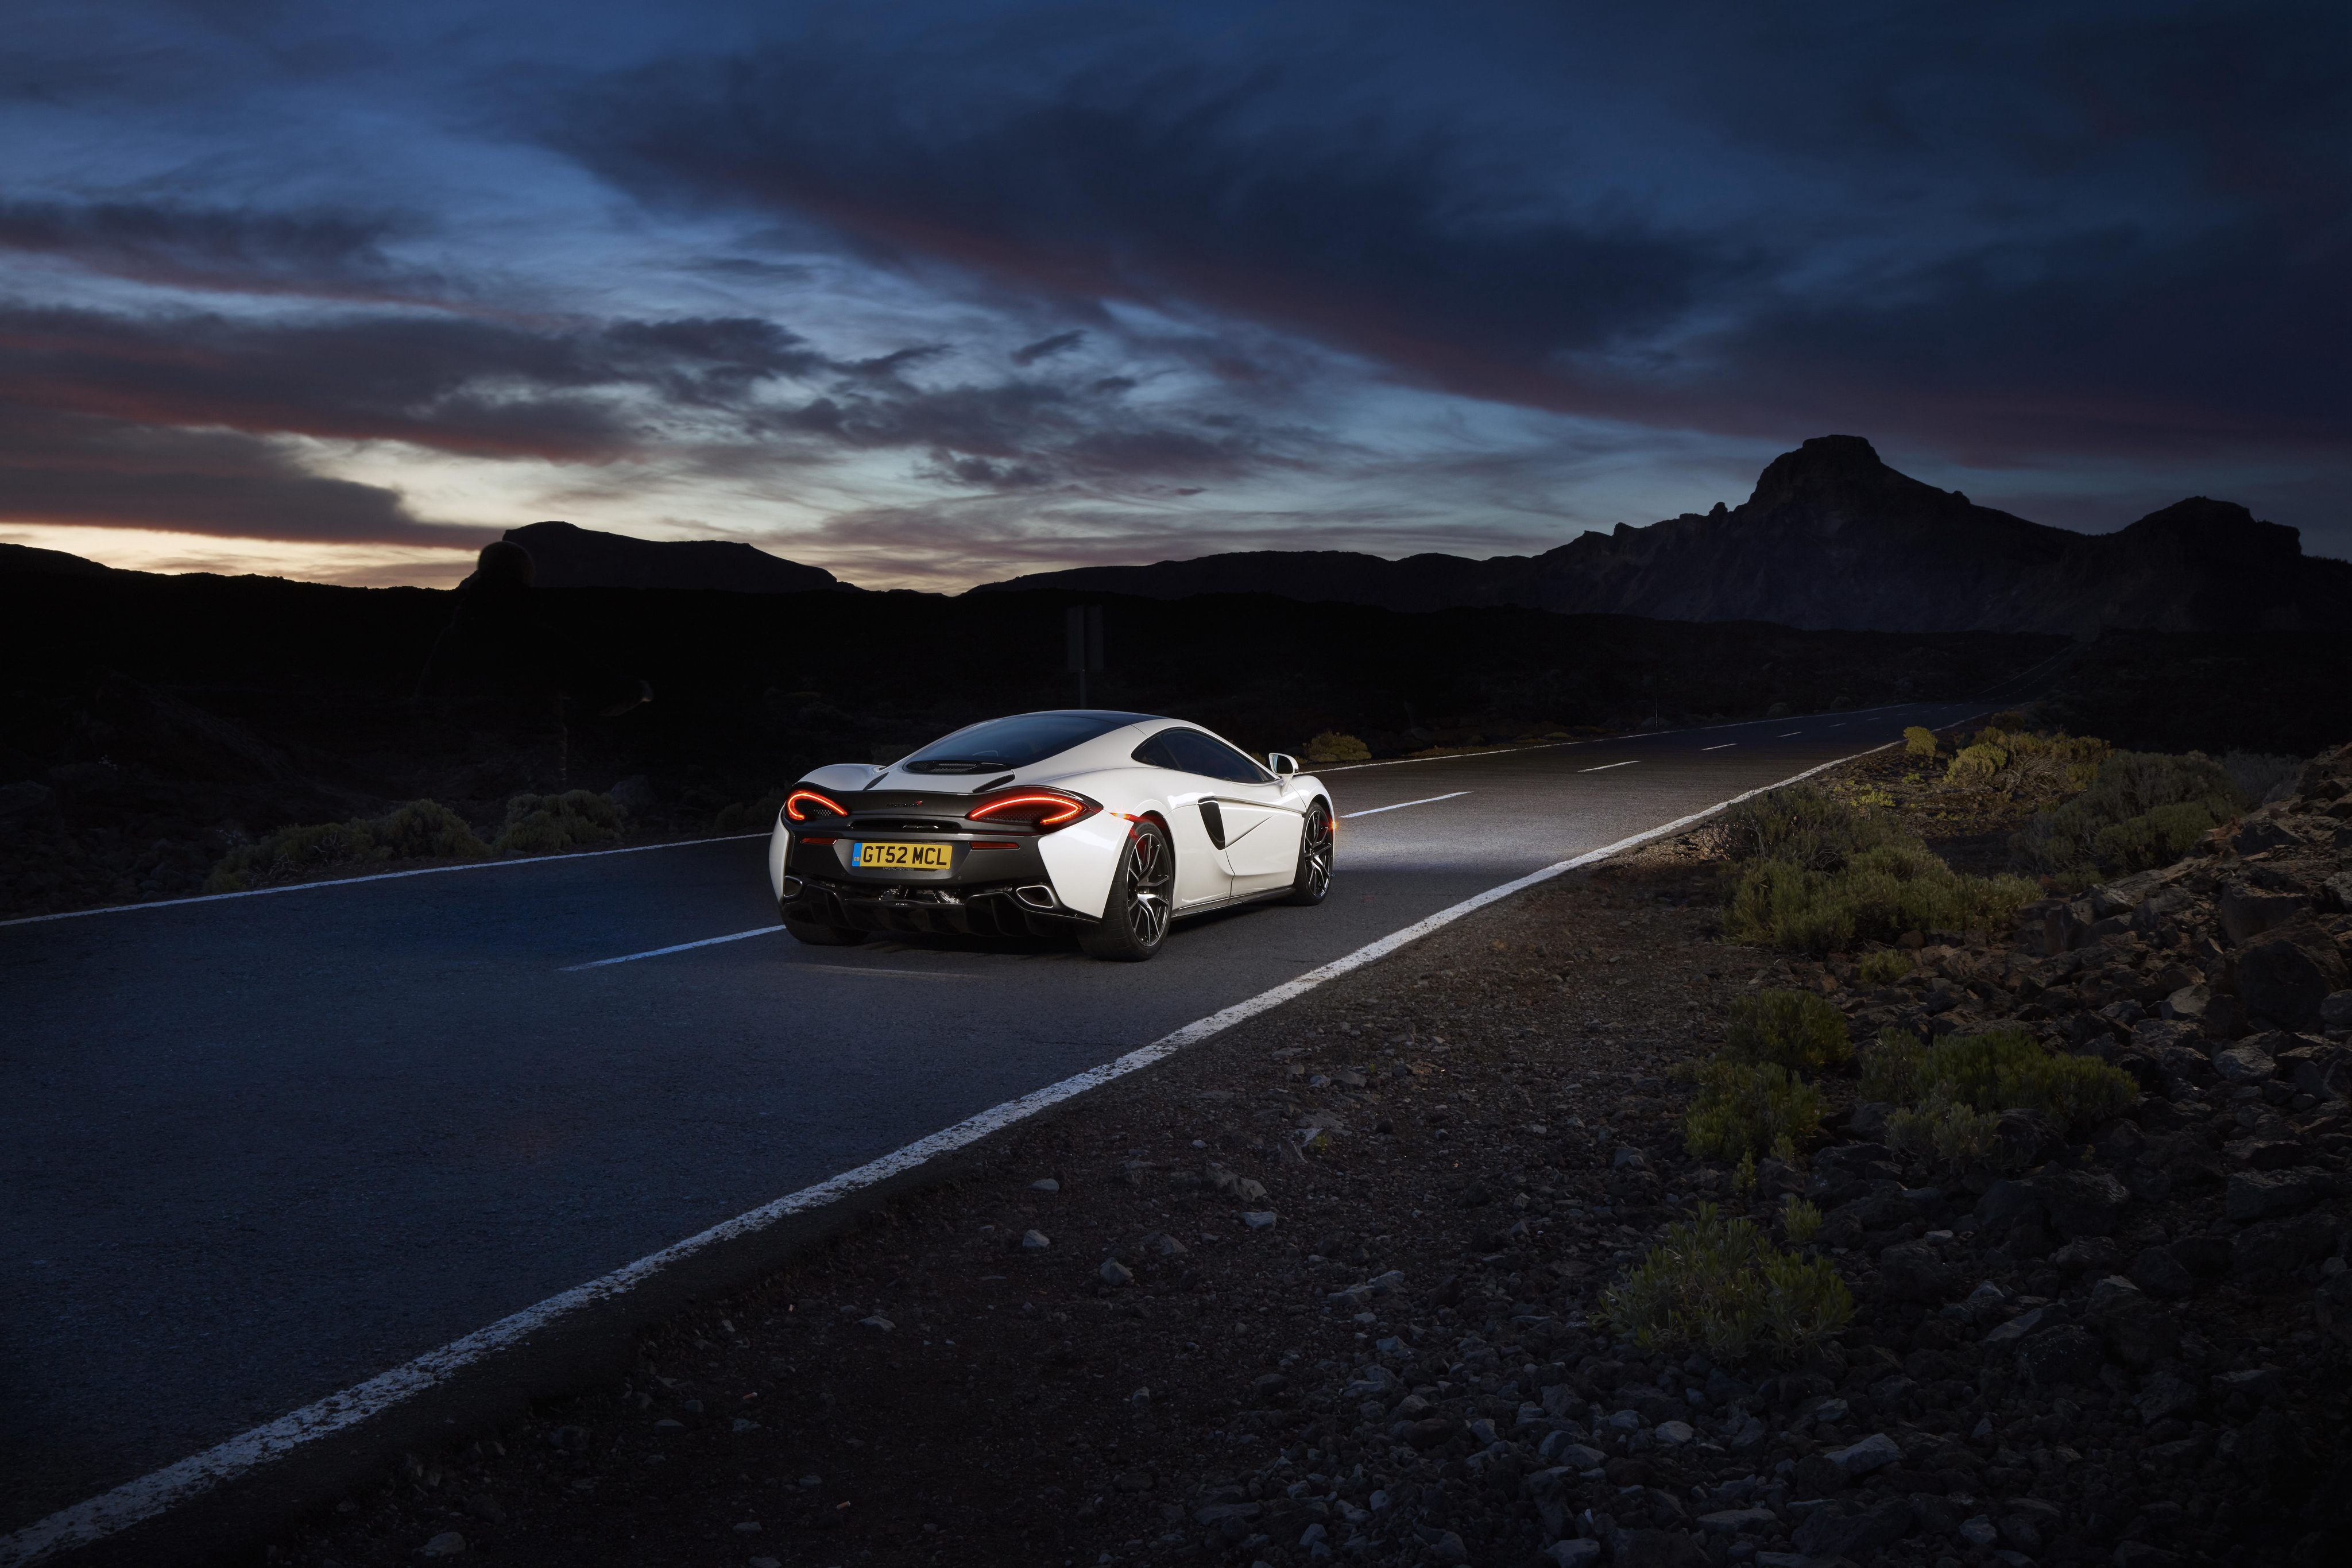 mclaren, supercar, night, cars, road, back view, rear view, 570gt images